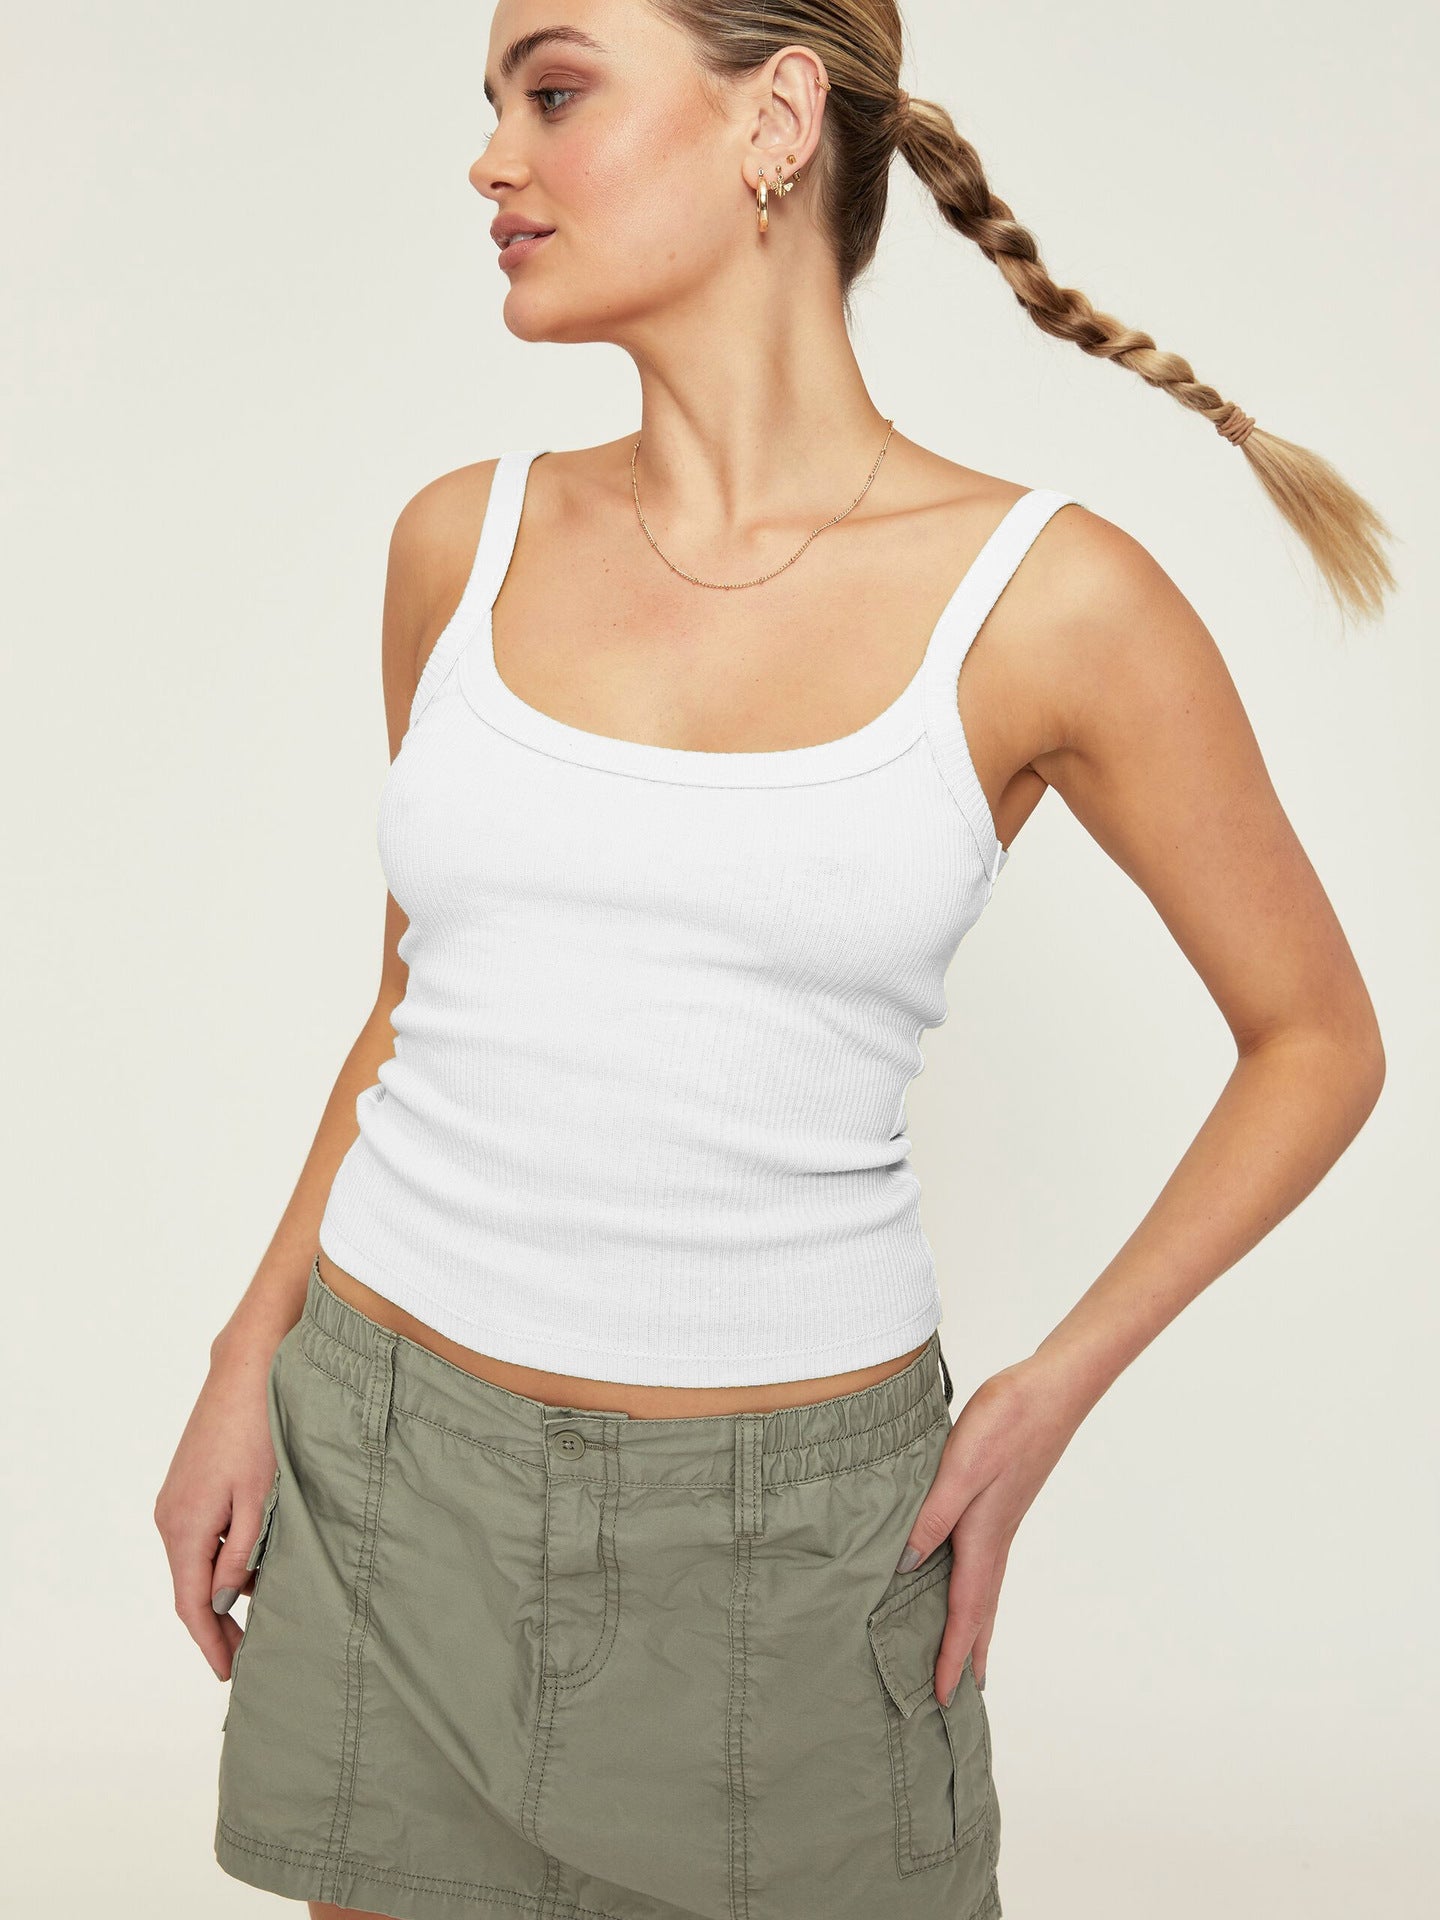 White Sexy Knitted Camisole Sleeveless Crop Top